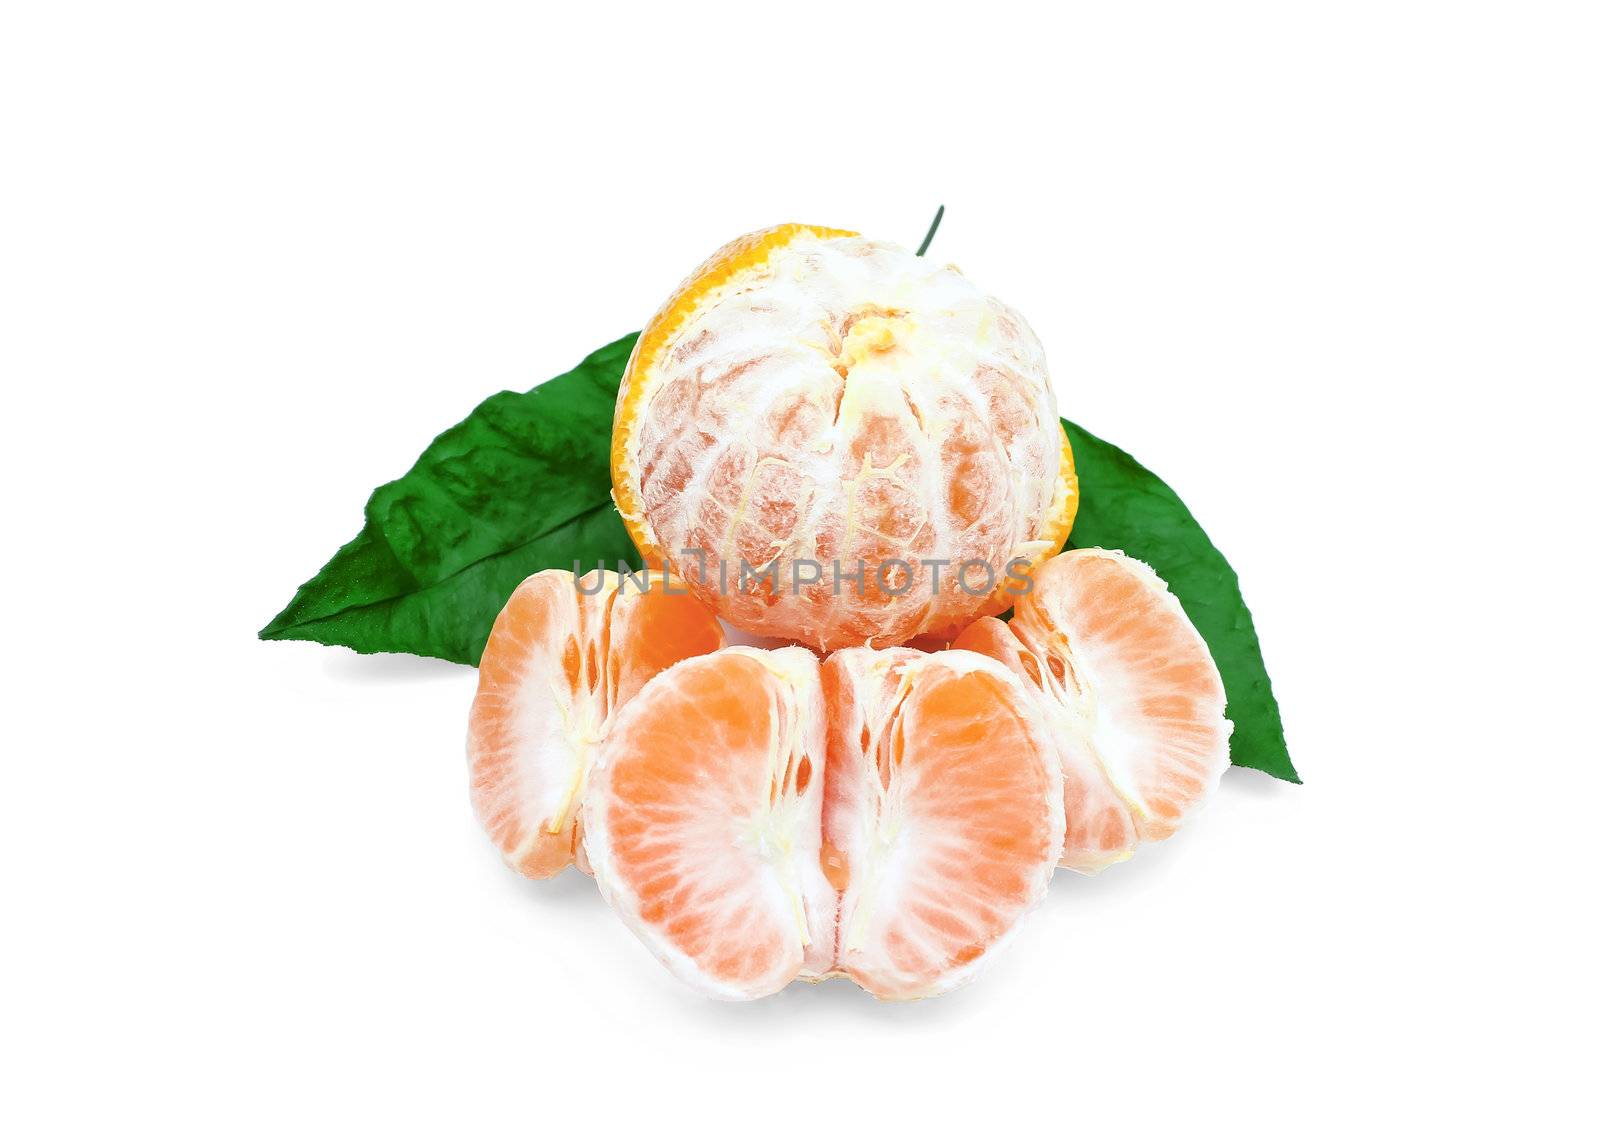 Tangerines slices on a white background. by NickNick